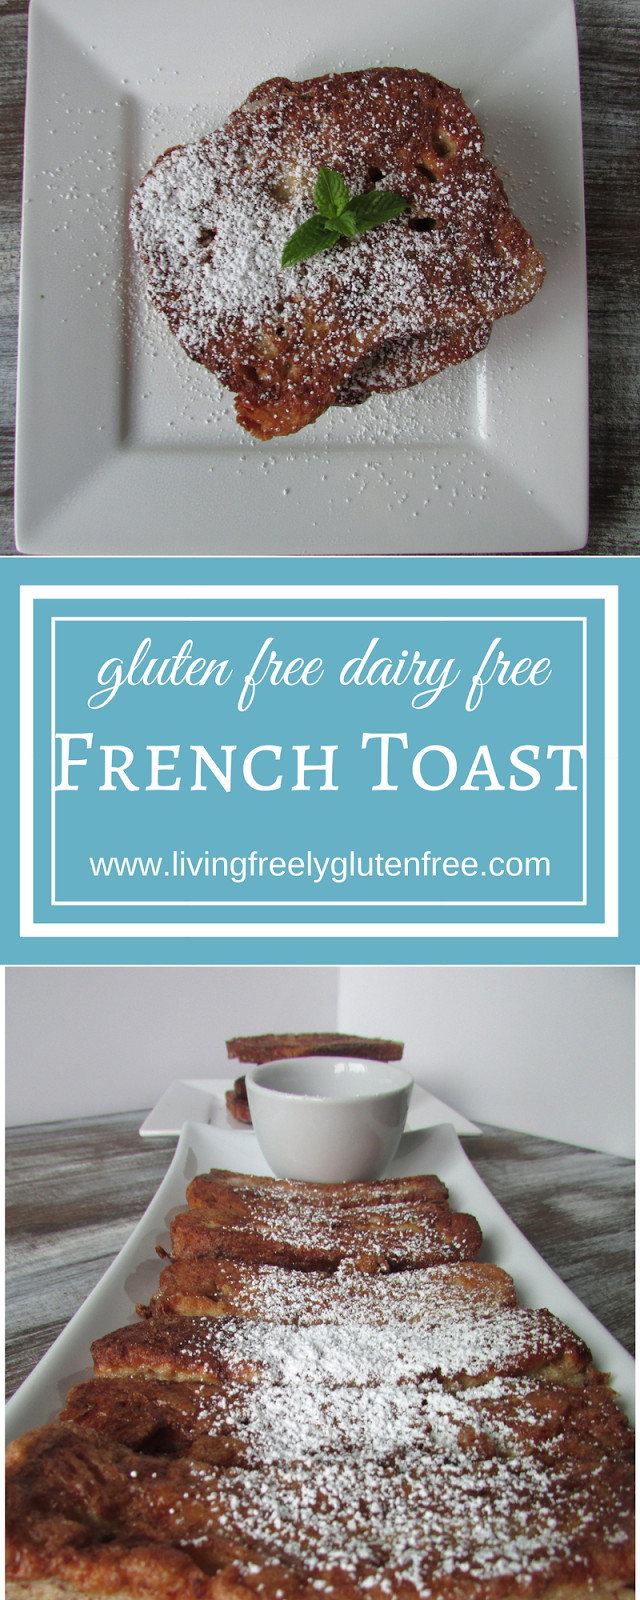 Dairy Free French Toast
 French Toast Gluten Free Dairy Free Living Freely